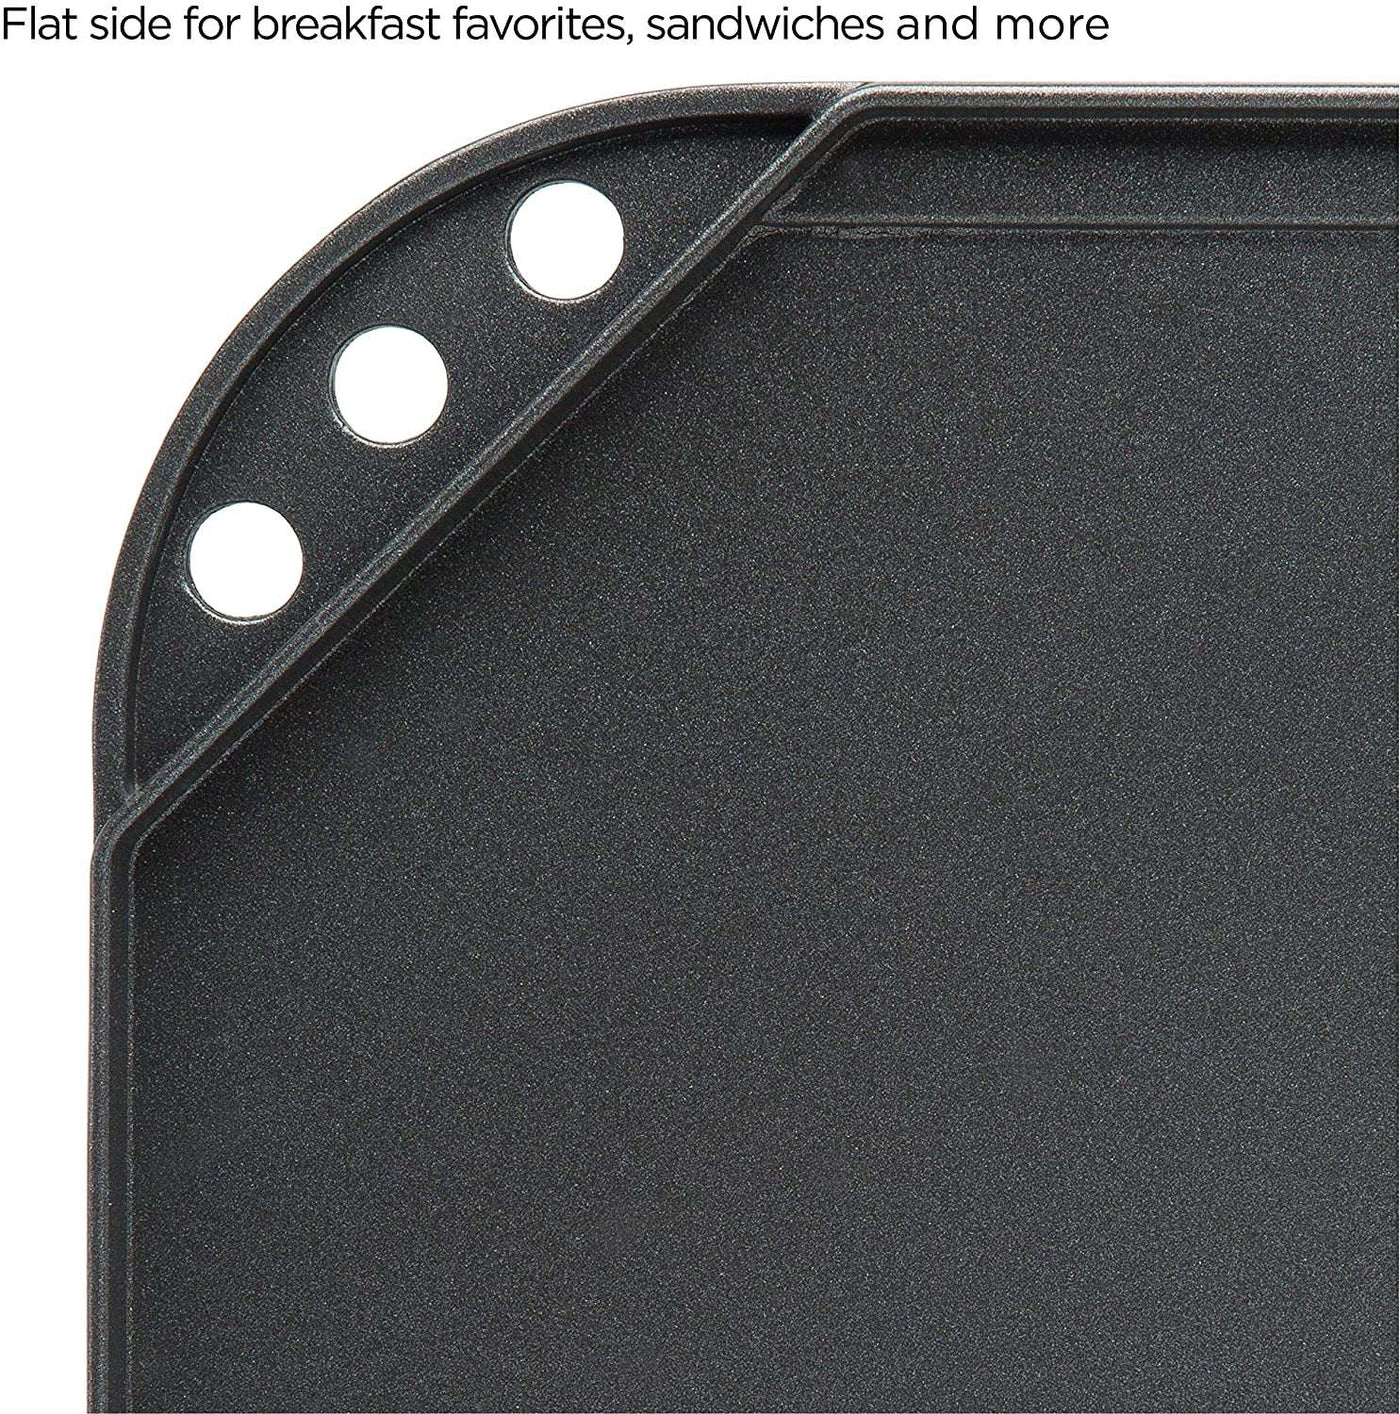  S·KITCHN Reversible Grill/Griddle Pan, Nonstick Stovetop Griddle  for Gas Stove,19.5” x 10.7: Home & Kitchen